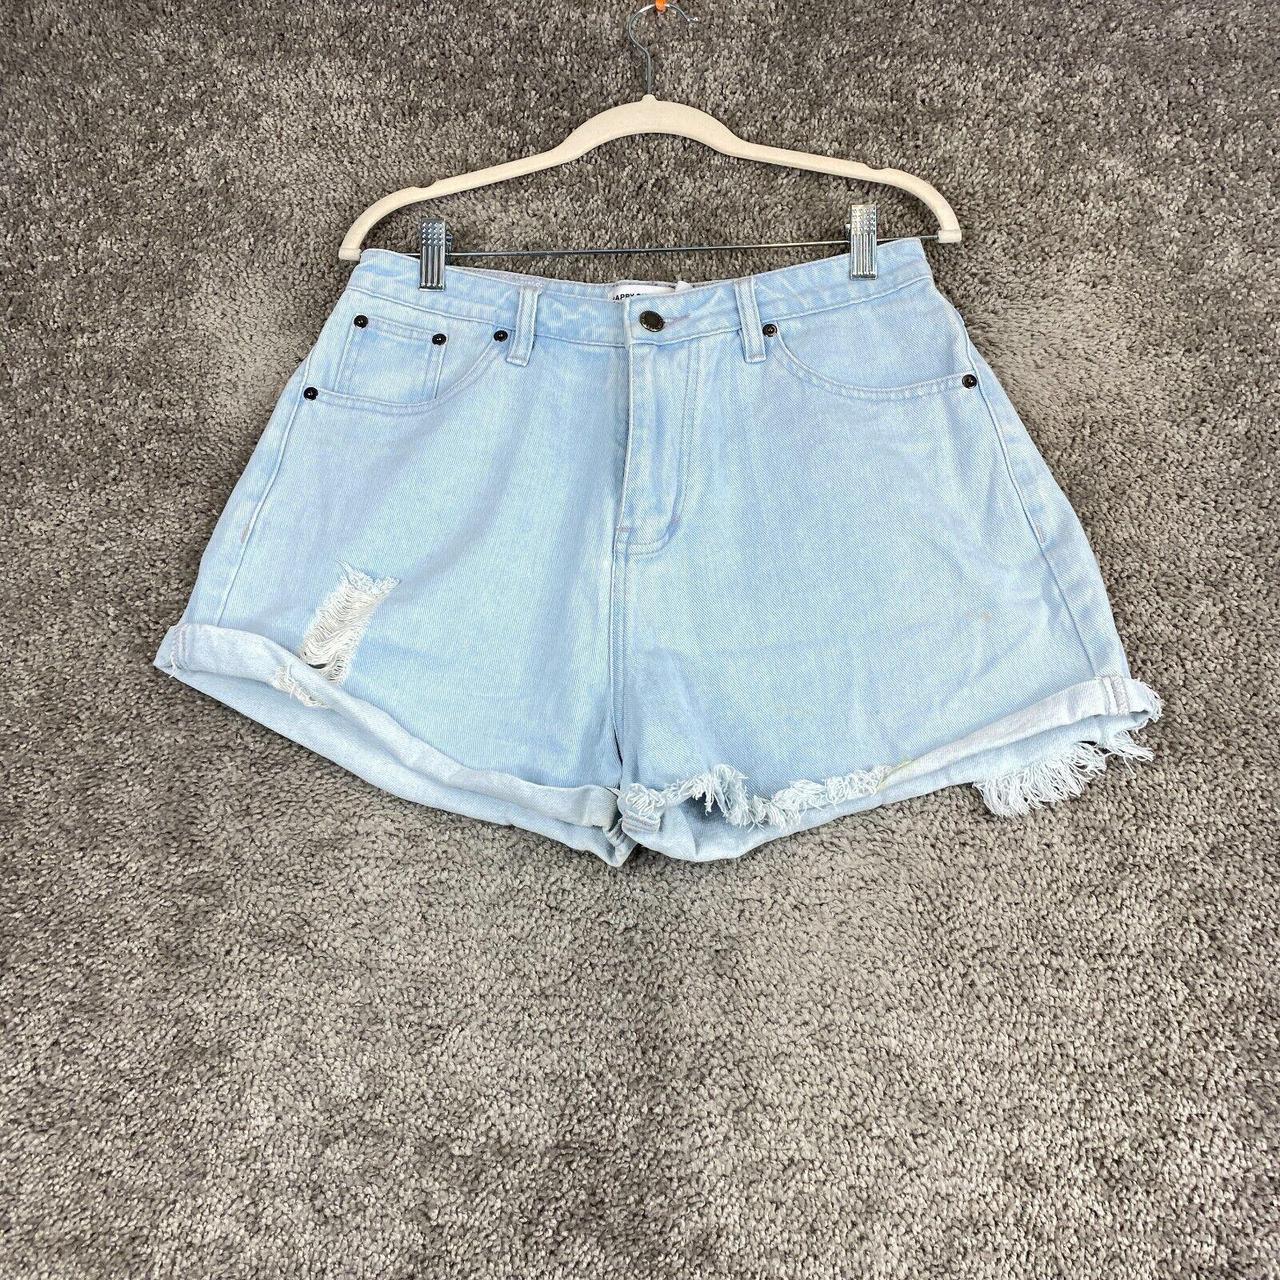 Product Image 1 - Fred Jean Shorts Womens Size